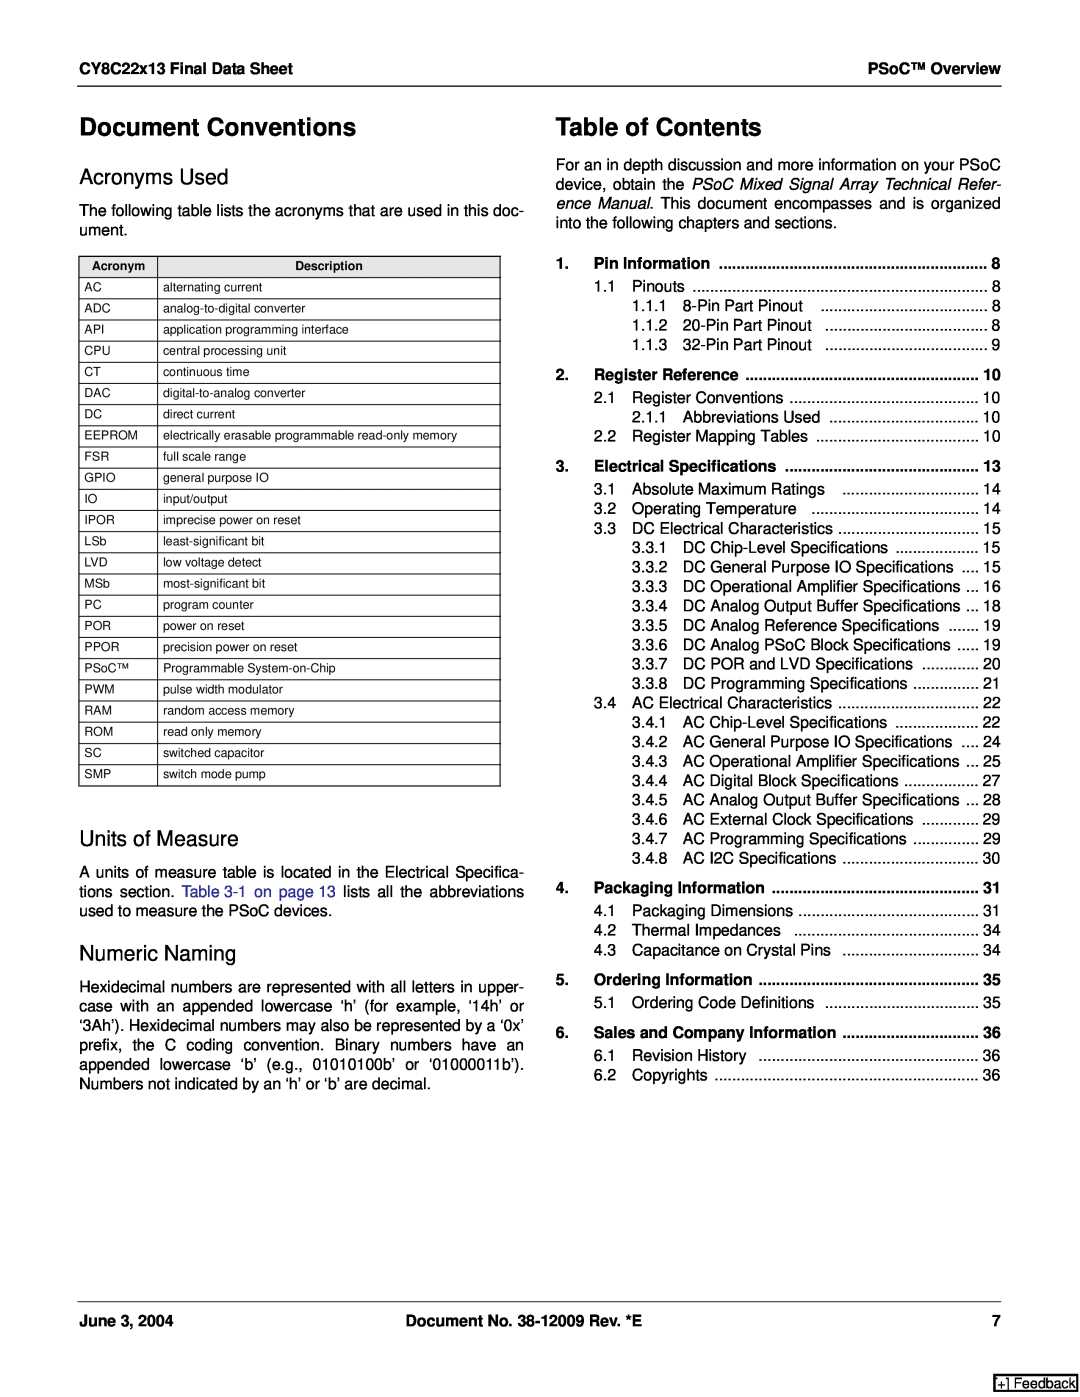 Cypress CY8C22213 Document Conventions, Table of Contents, Acronyms Used, Units of Measure, Numeric Naming, PSoC Overview 